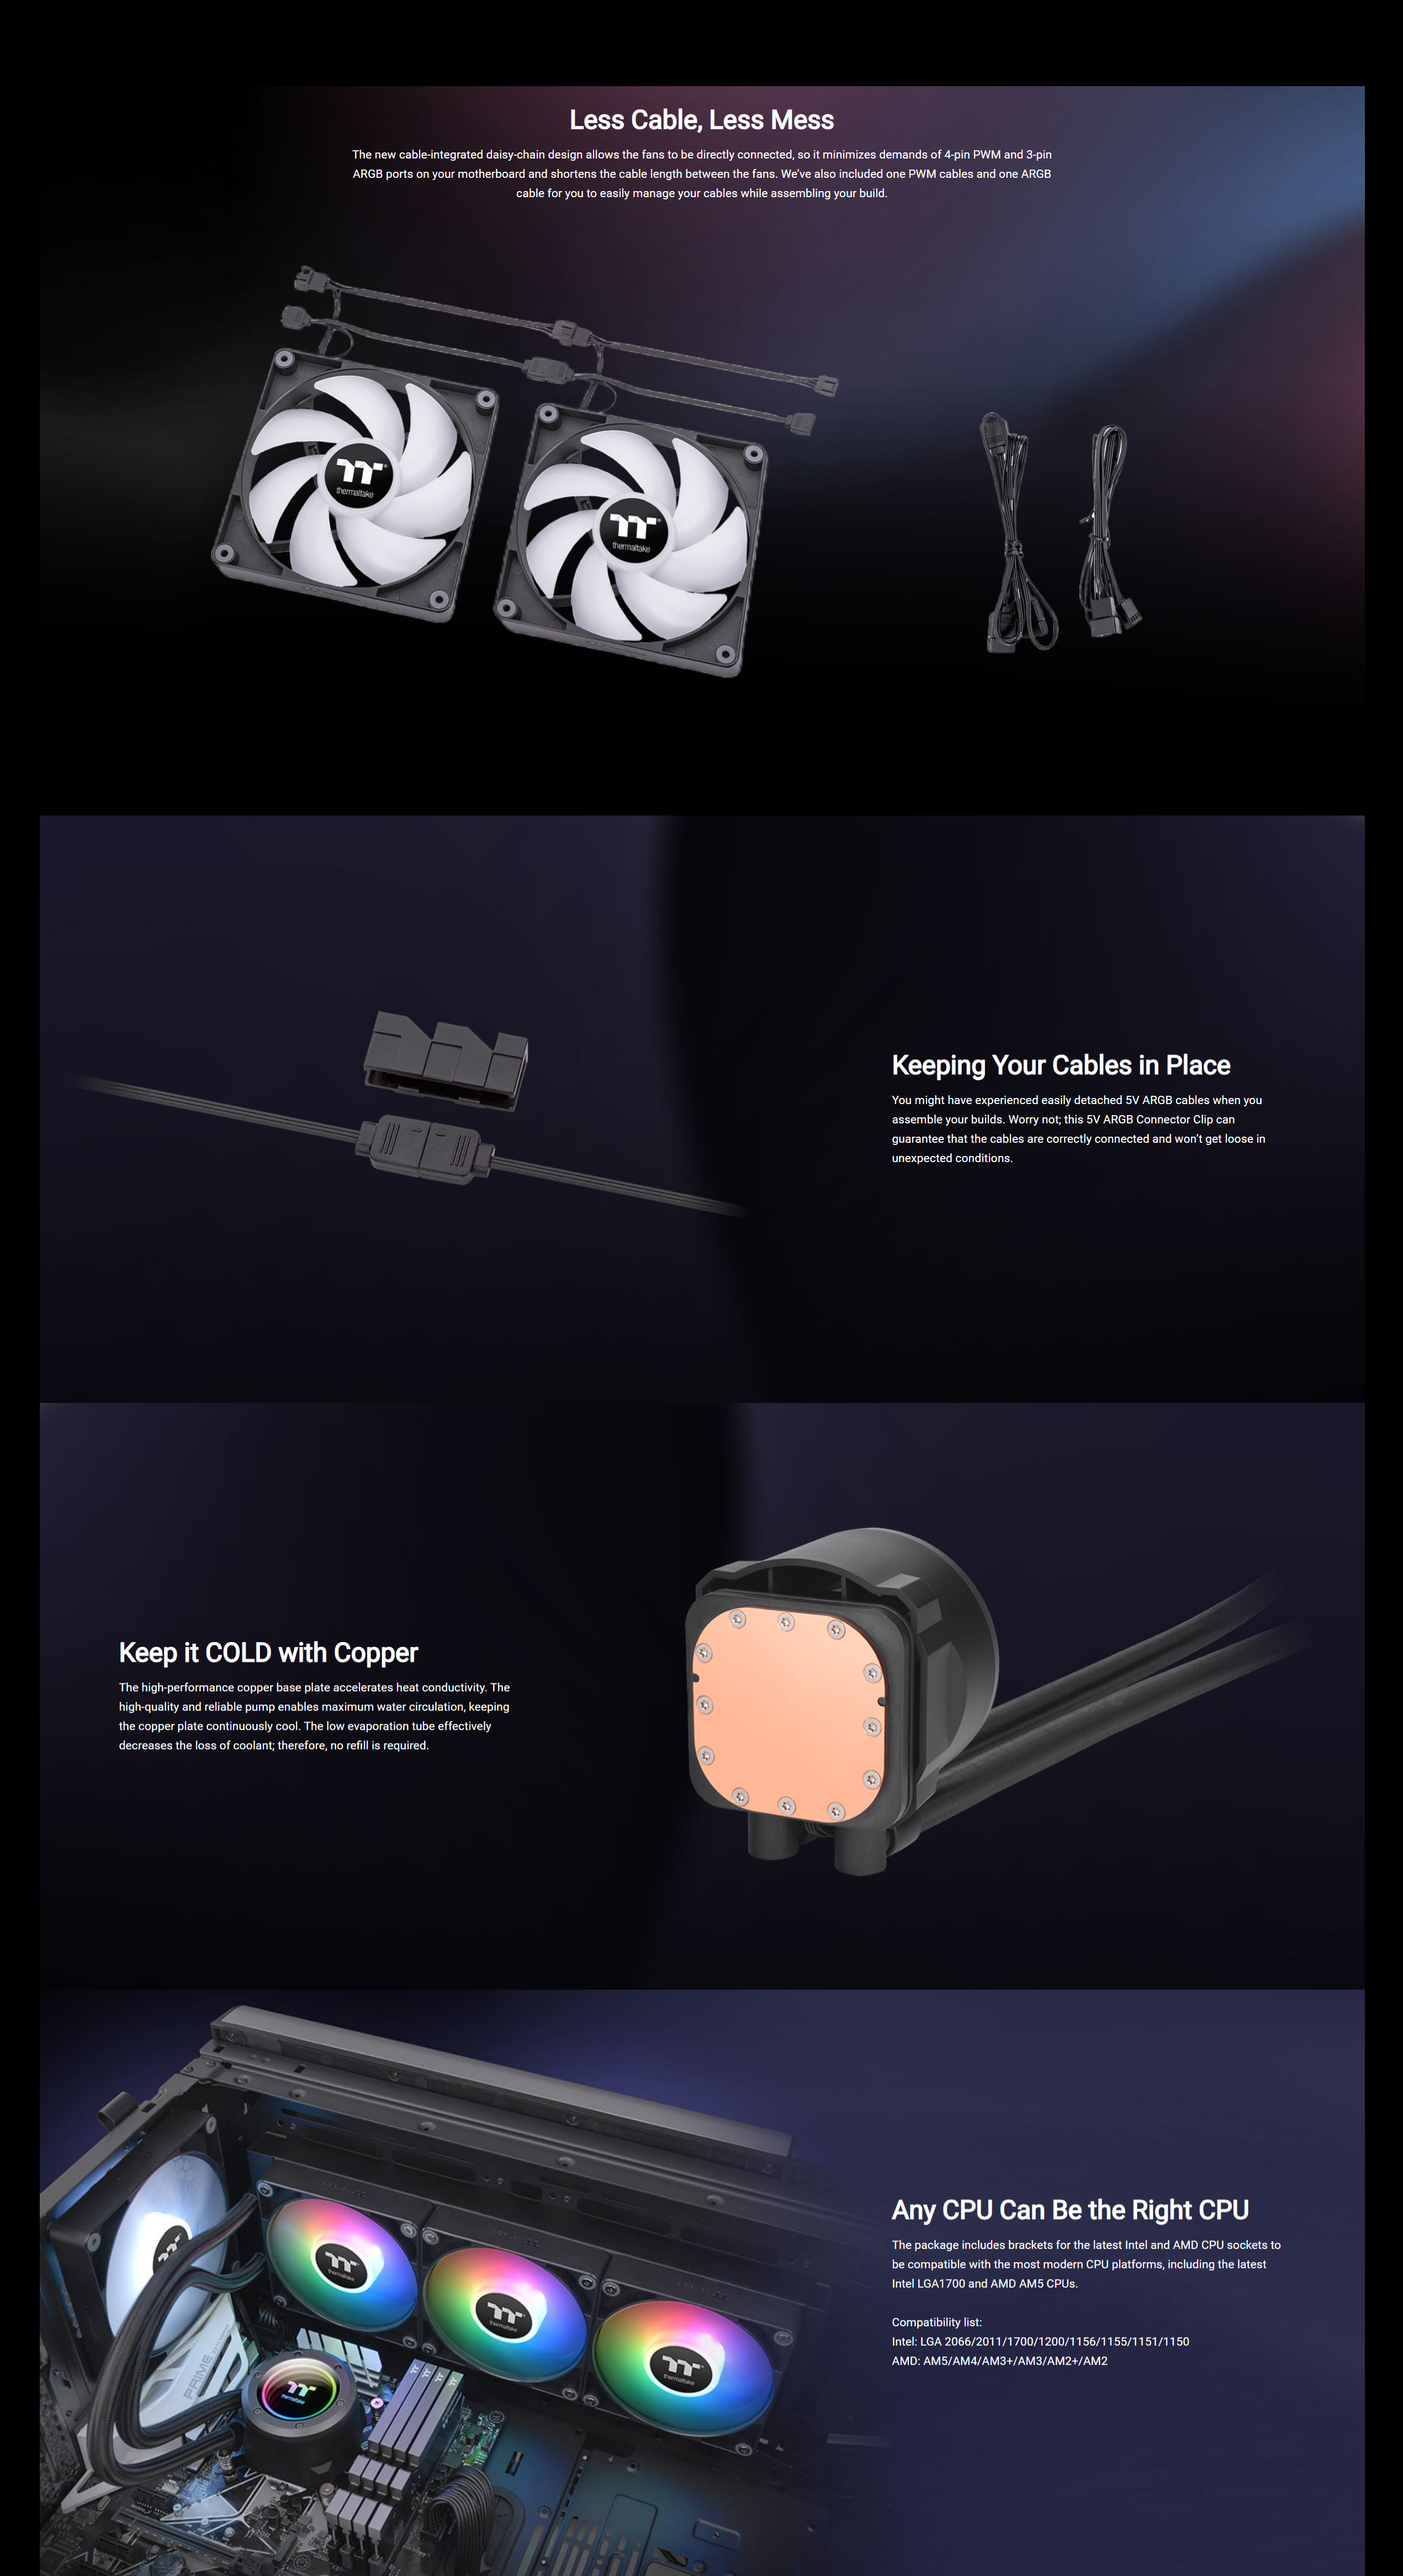 A large marketing image providing additional information about the product Thermaltake TH360 V2 ARGB - 360mm AIO Liquid CPU Cooler - Additional alt info not provided